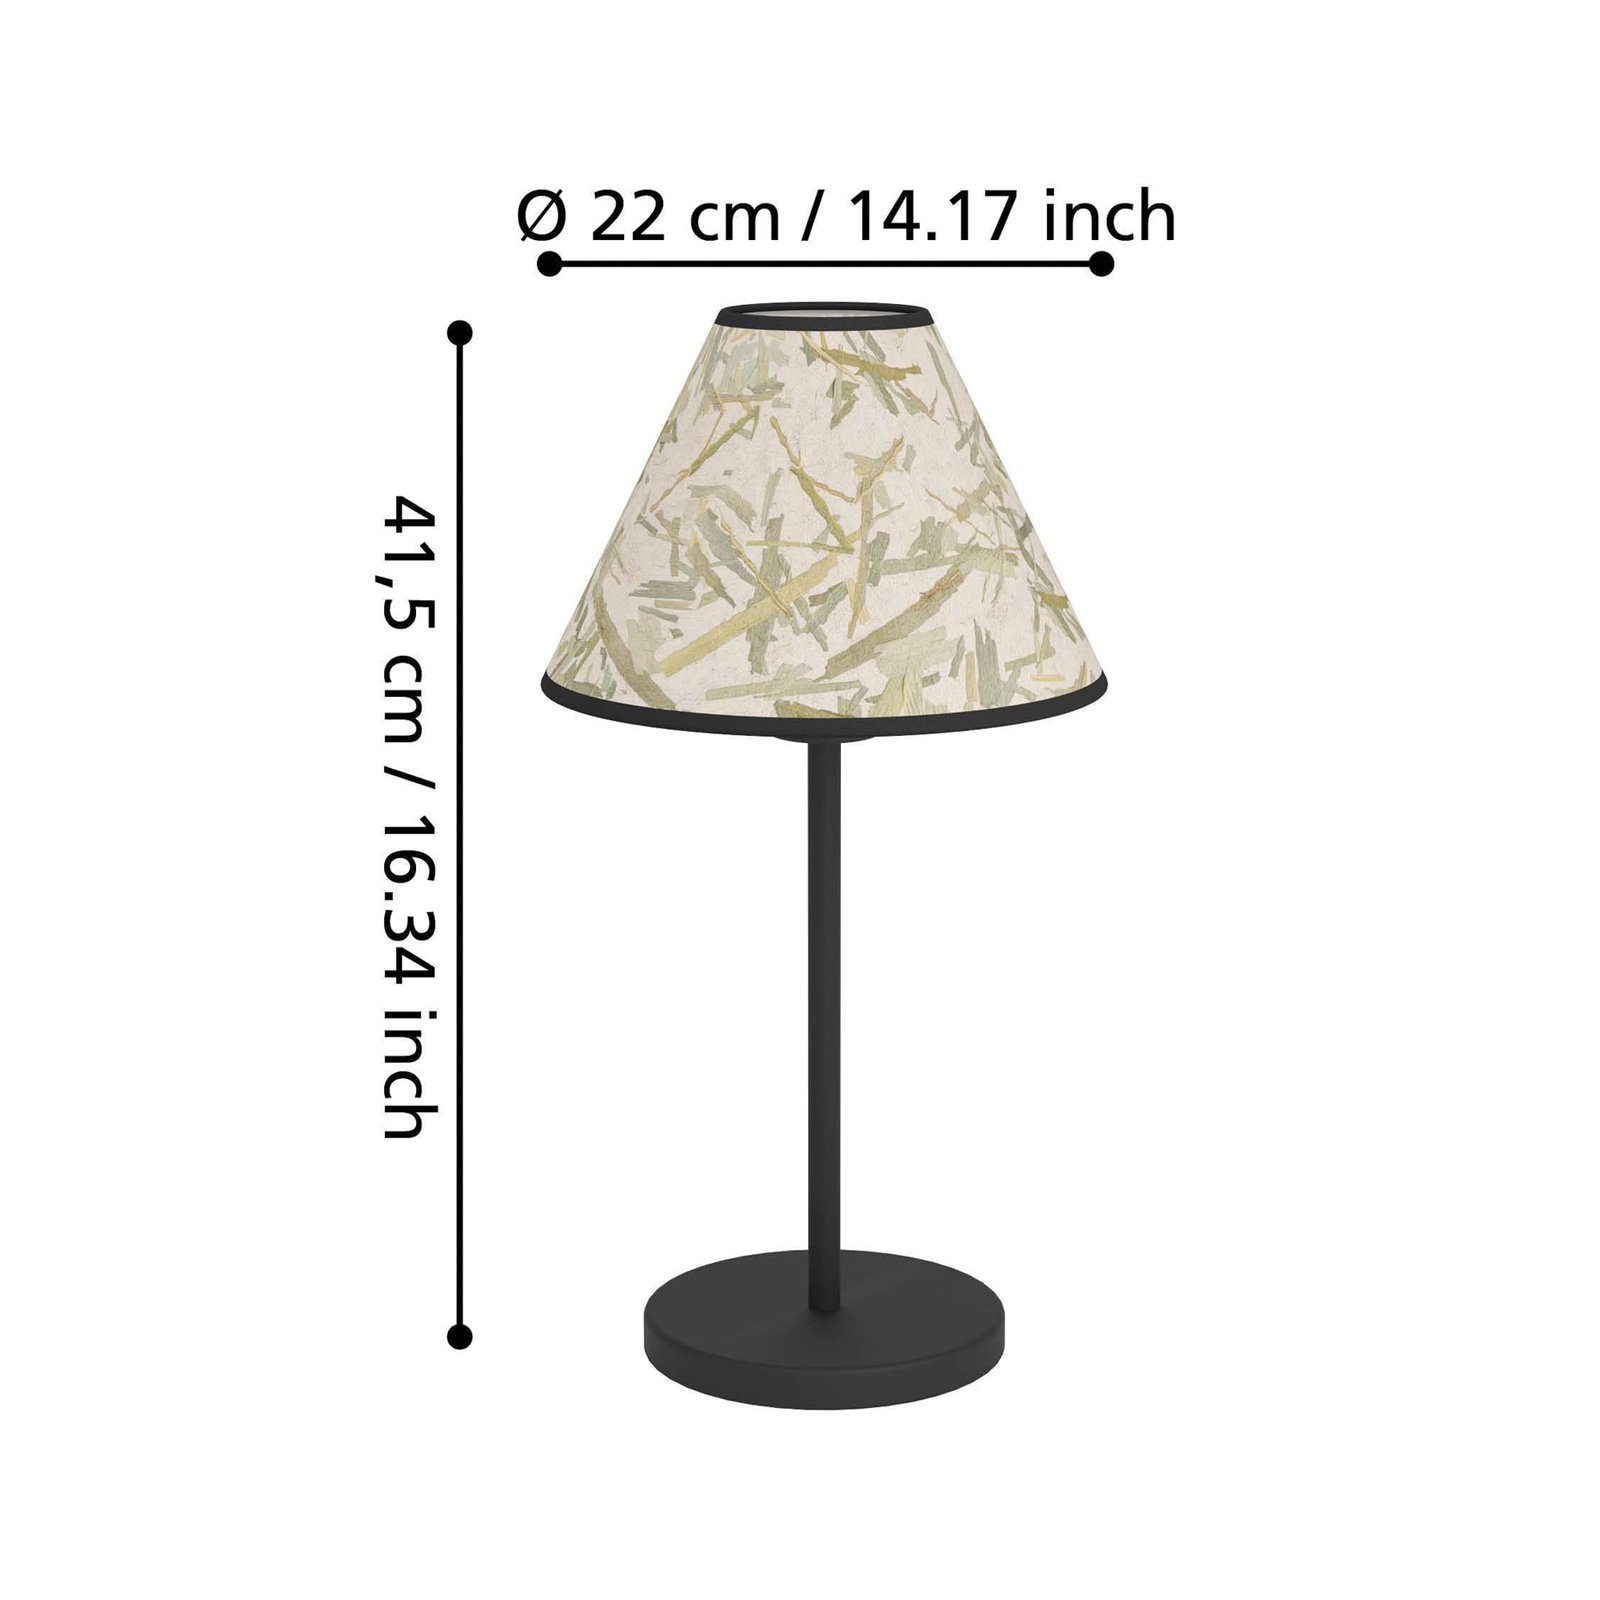 Oxpark table lamp, height 41.5 cm, green/white/black